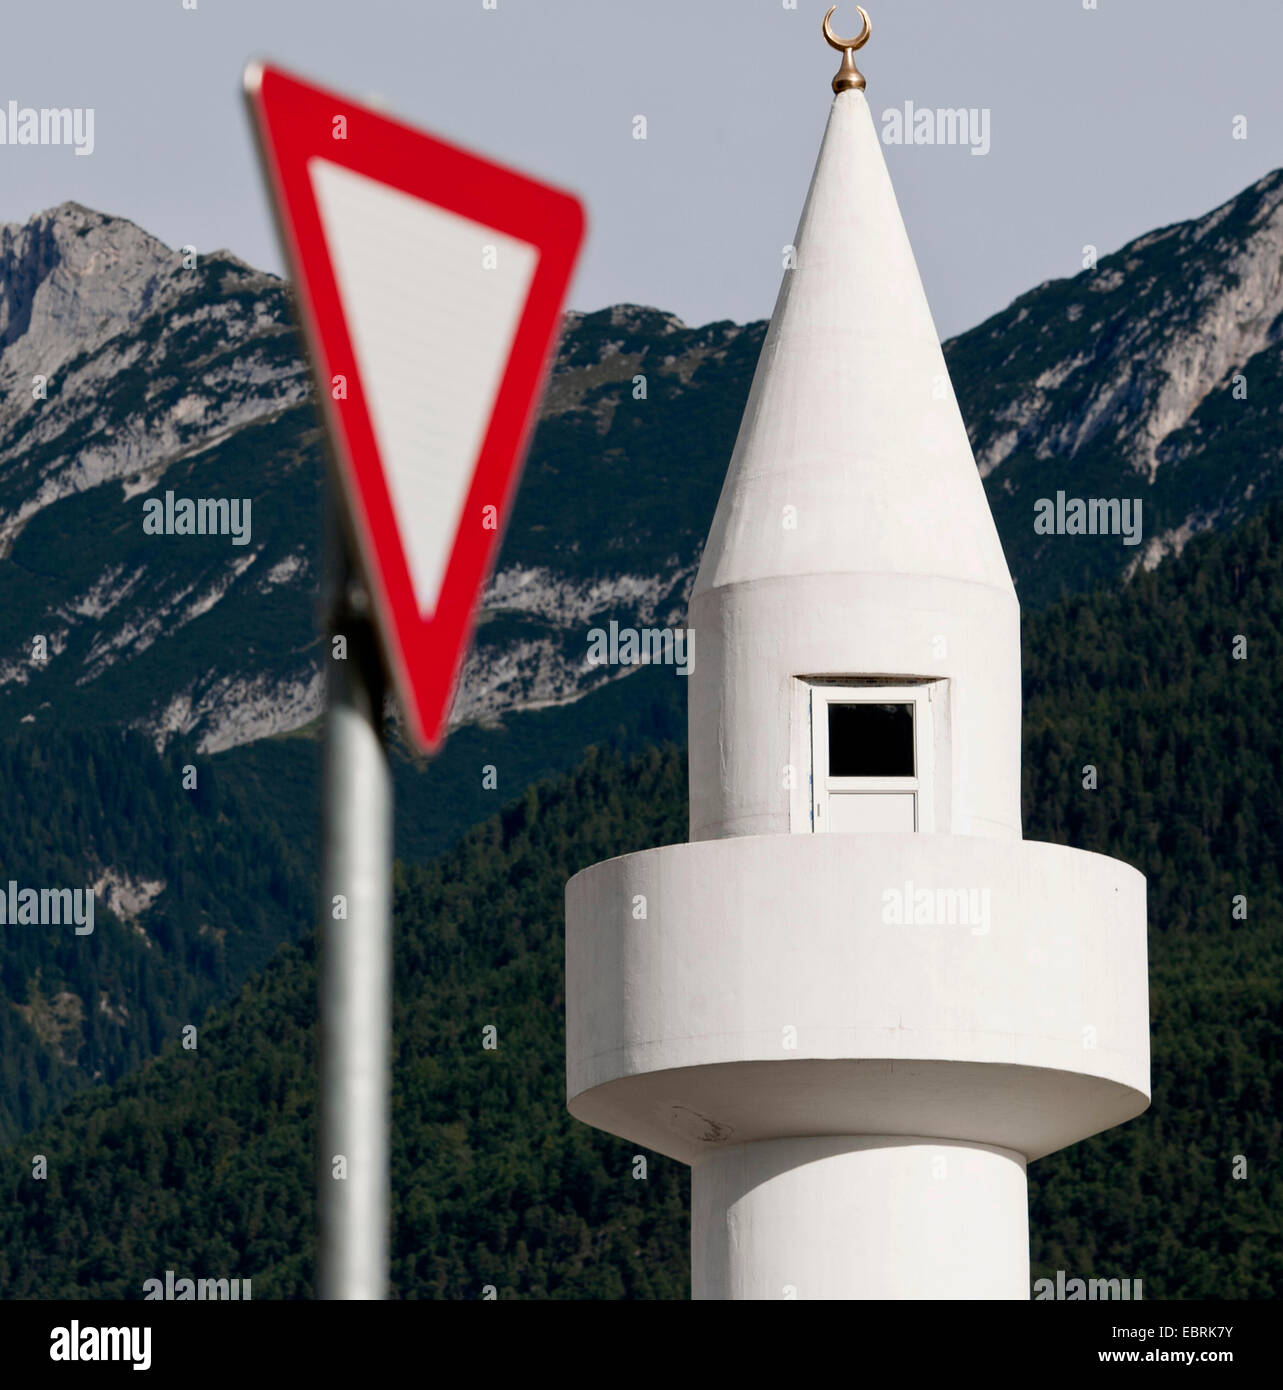 minaret and give way sign in front of looming mountains, Austria, Tyrol, Telfs Stock Photo